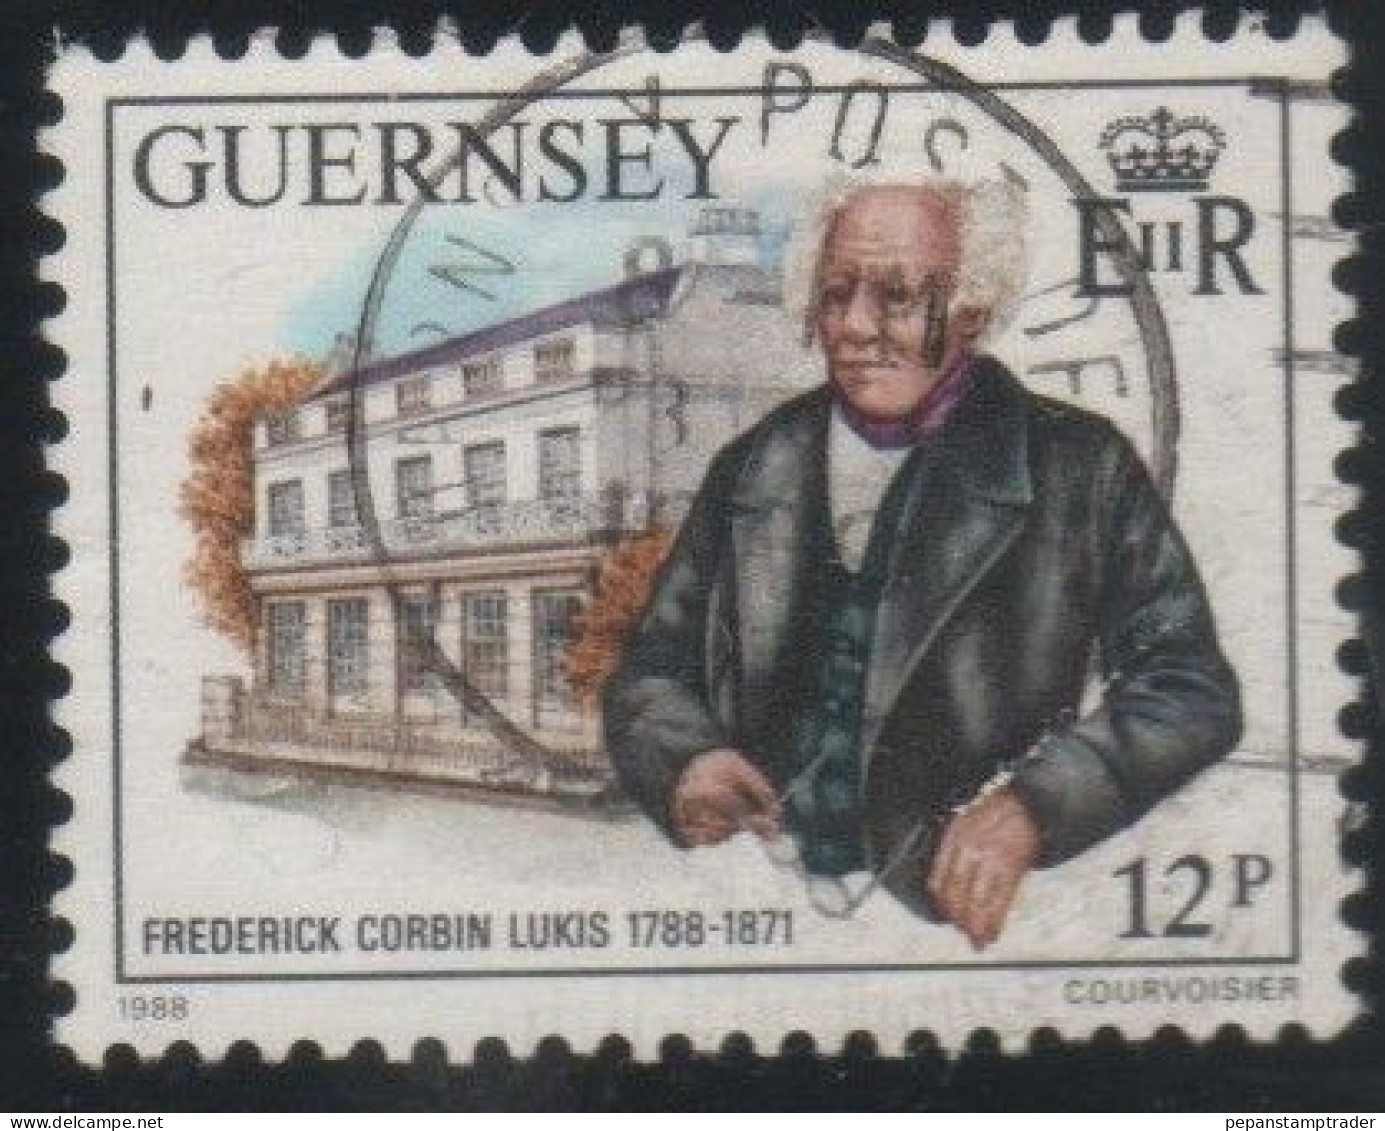 Guernsey - #385 - Used - Guernsey